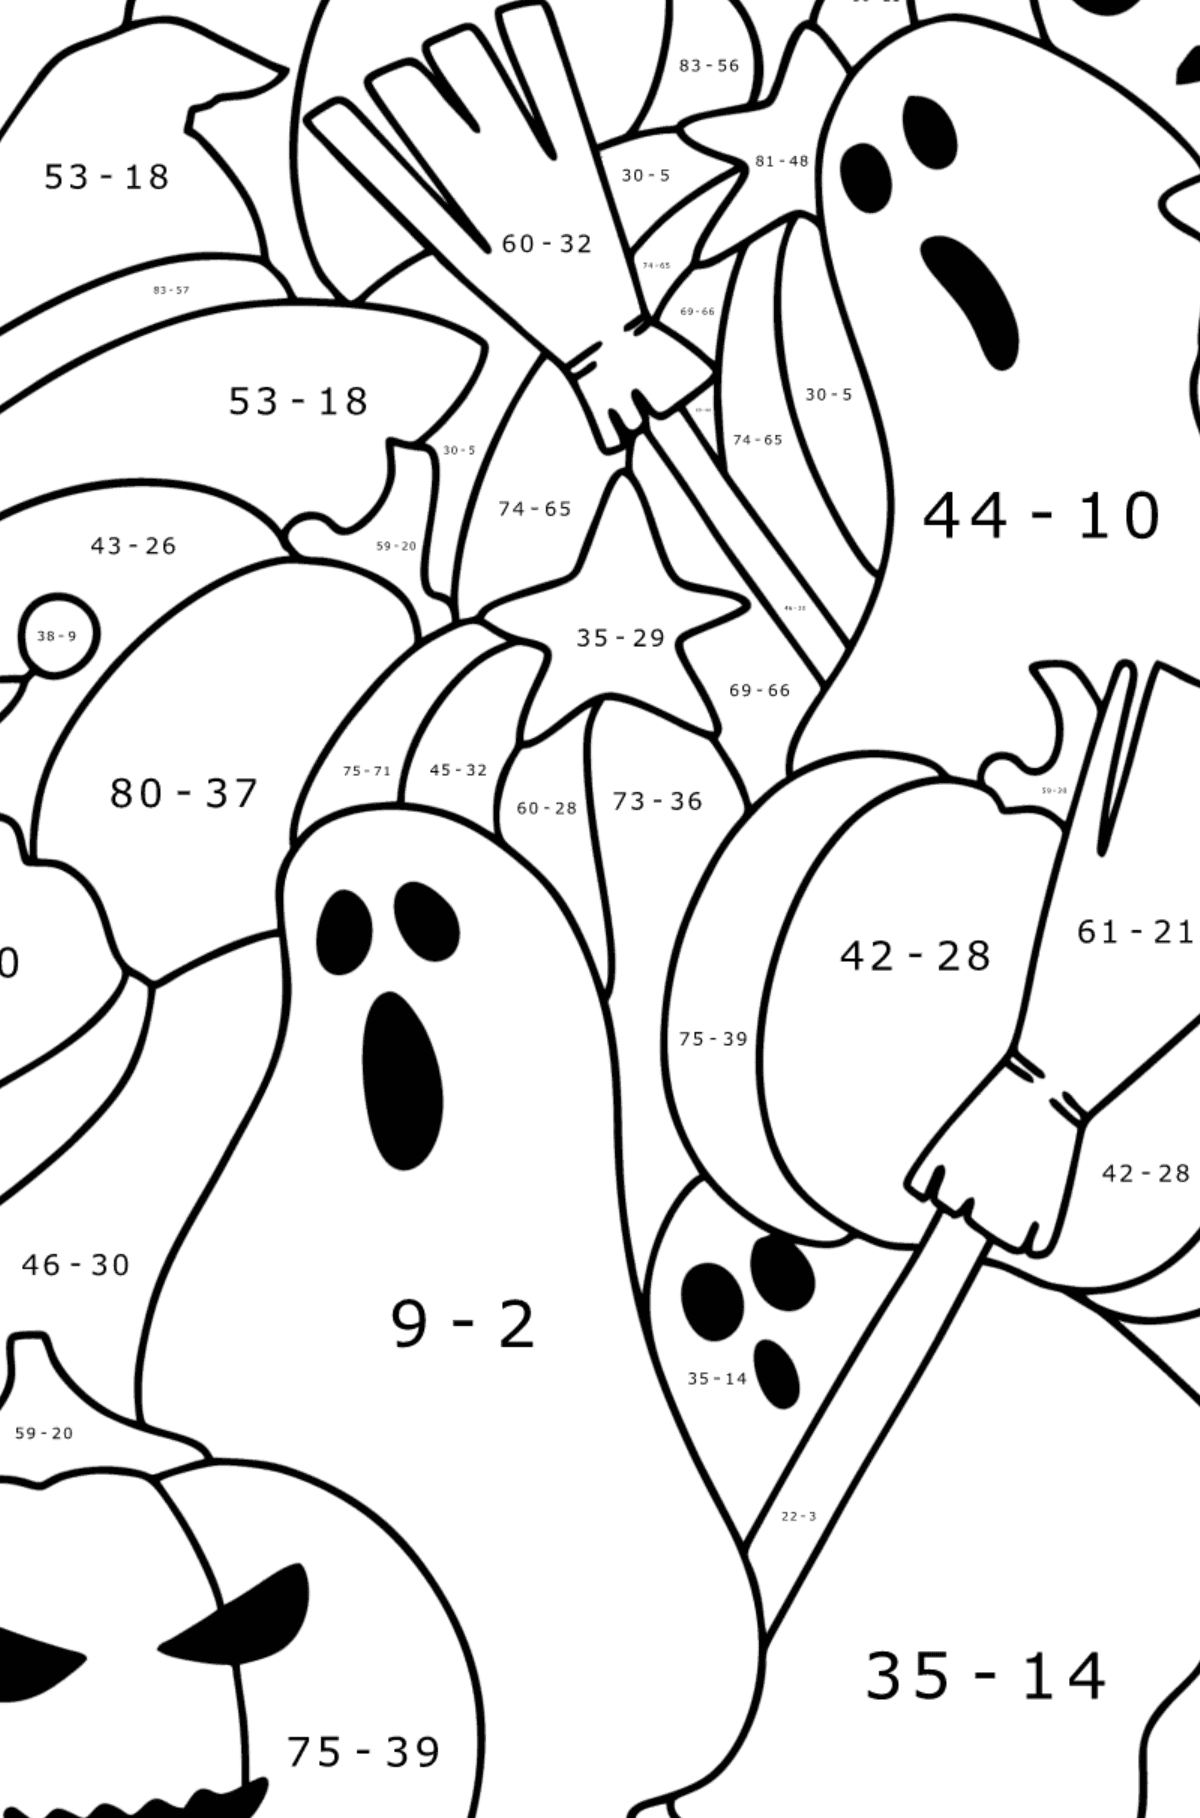 Doodle Сoloring page for Kids - Halloween - Math Coloring - Subtraction for Kids